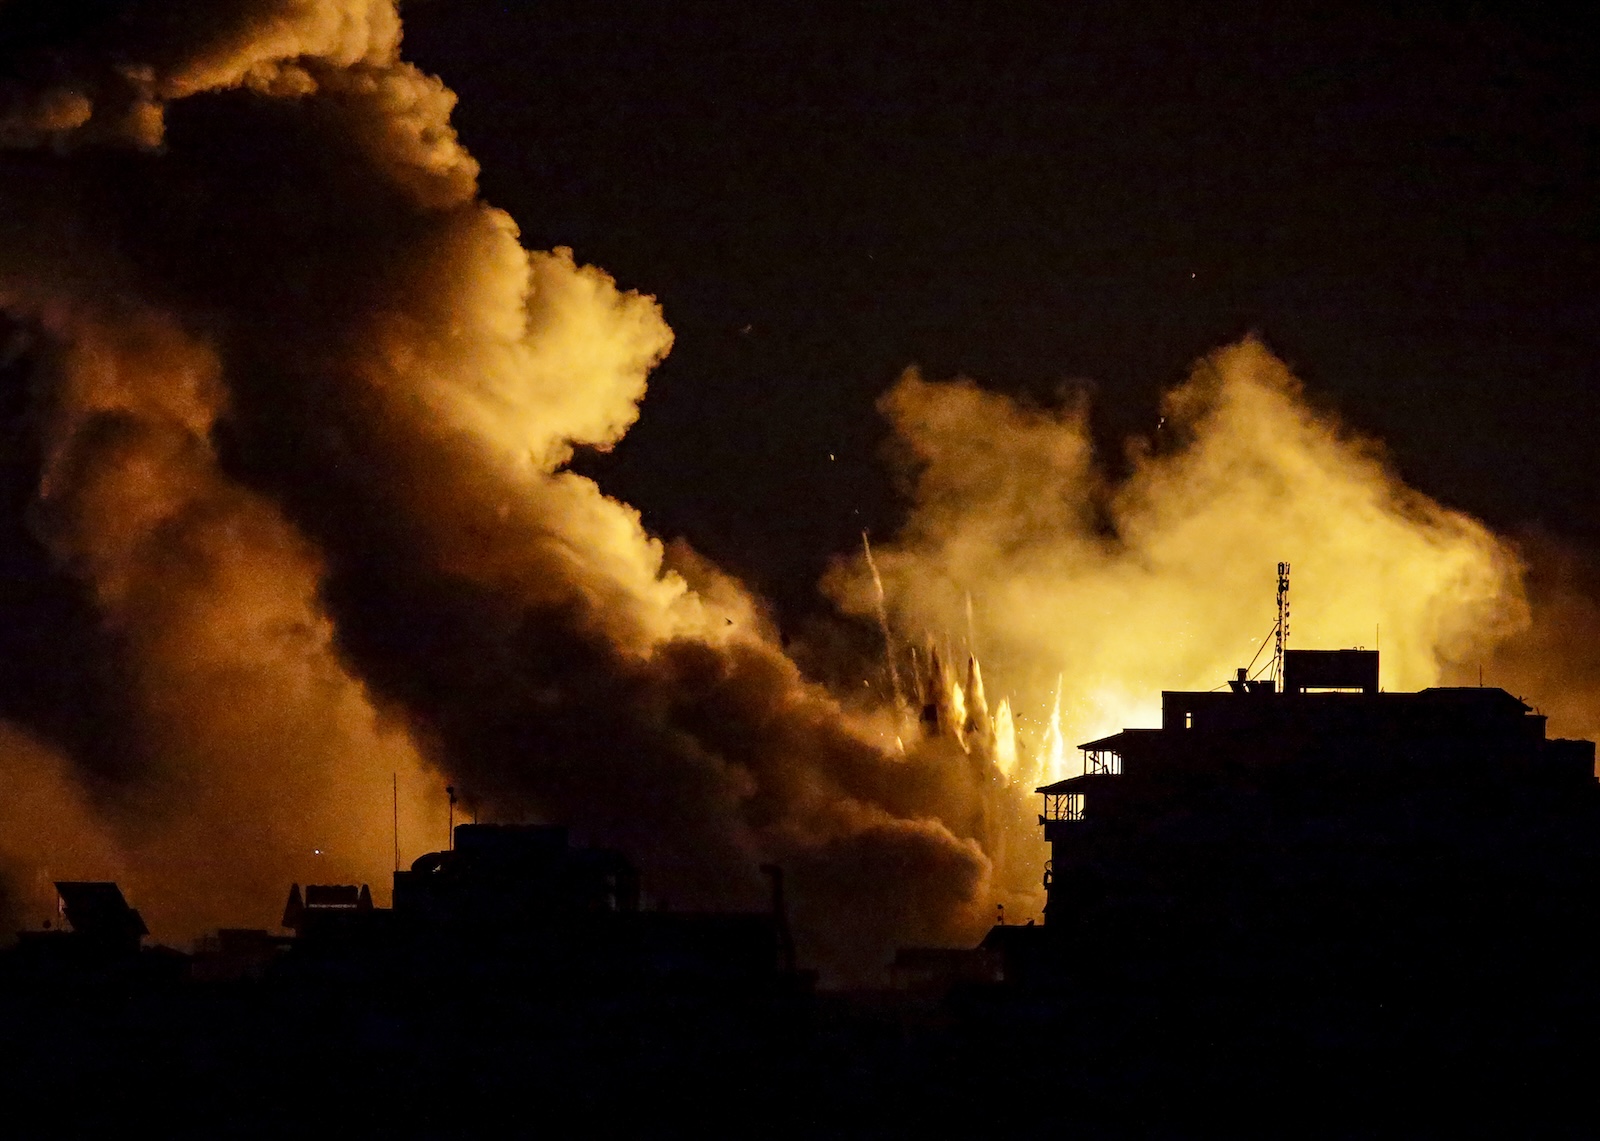 epa10962790 Smoke rises after an Israeli airstrike in Tal Al-Hawa neighbourhood in Gaza City, 18 October 2023. (Issued 07 November 2023). 07 November 2023, marks one month since Hamas militants launched an attack against Israel from the Gaza Strip, which was followed by Israeli operations in Gaza and the West Bank. More than 10,000 Palestinians and at least 1,400 Israelis have been killed and more than 200 others were taken hostage by Hamas militants, according to the Palestinian health authority and  the Israel Defense Forces (IDF).  EPA/MOHAMMED SABER  ATTENTION: This Image is part of a PHOTO SET